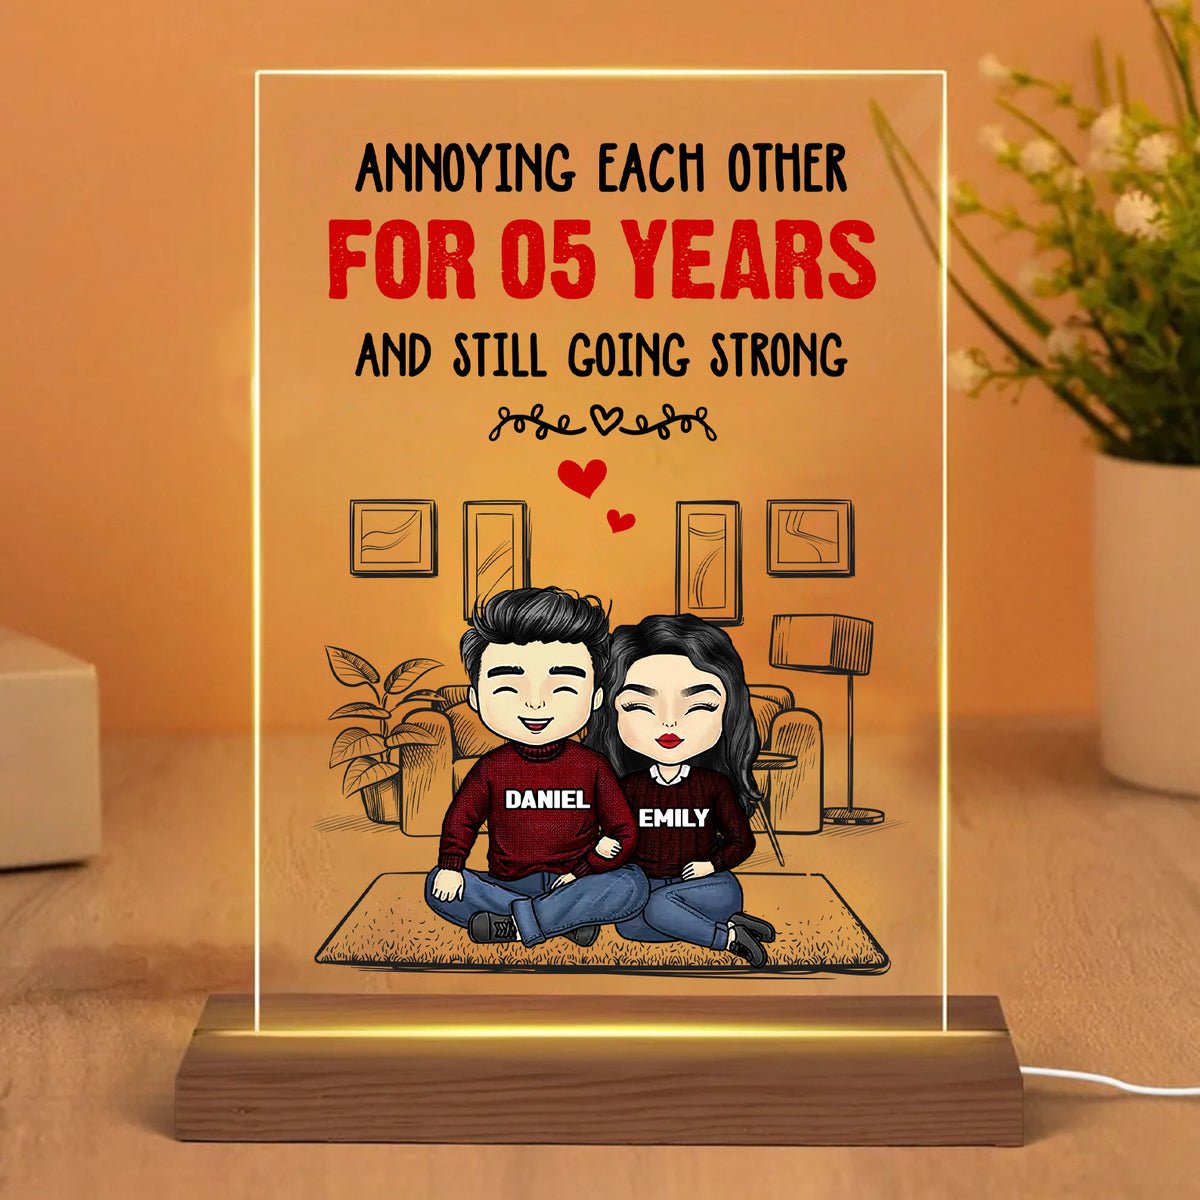 Annoying Each Other - Personalized Acrylic Plaque LED Lamp - Best Gift For Couple